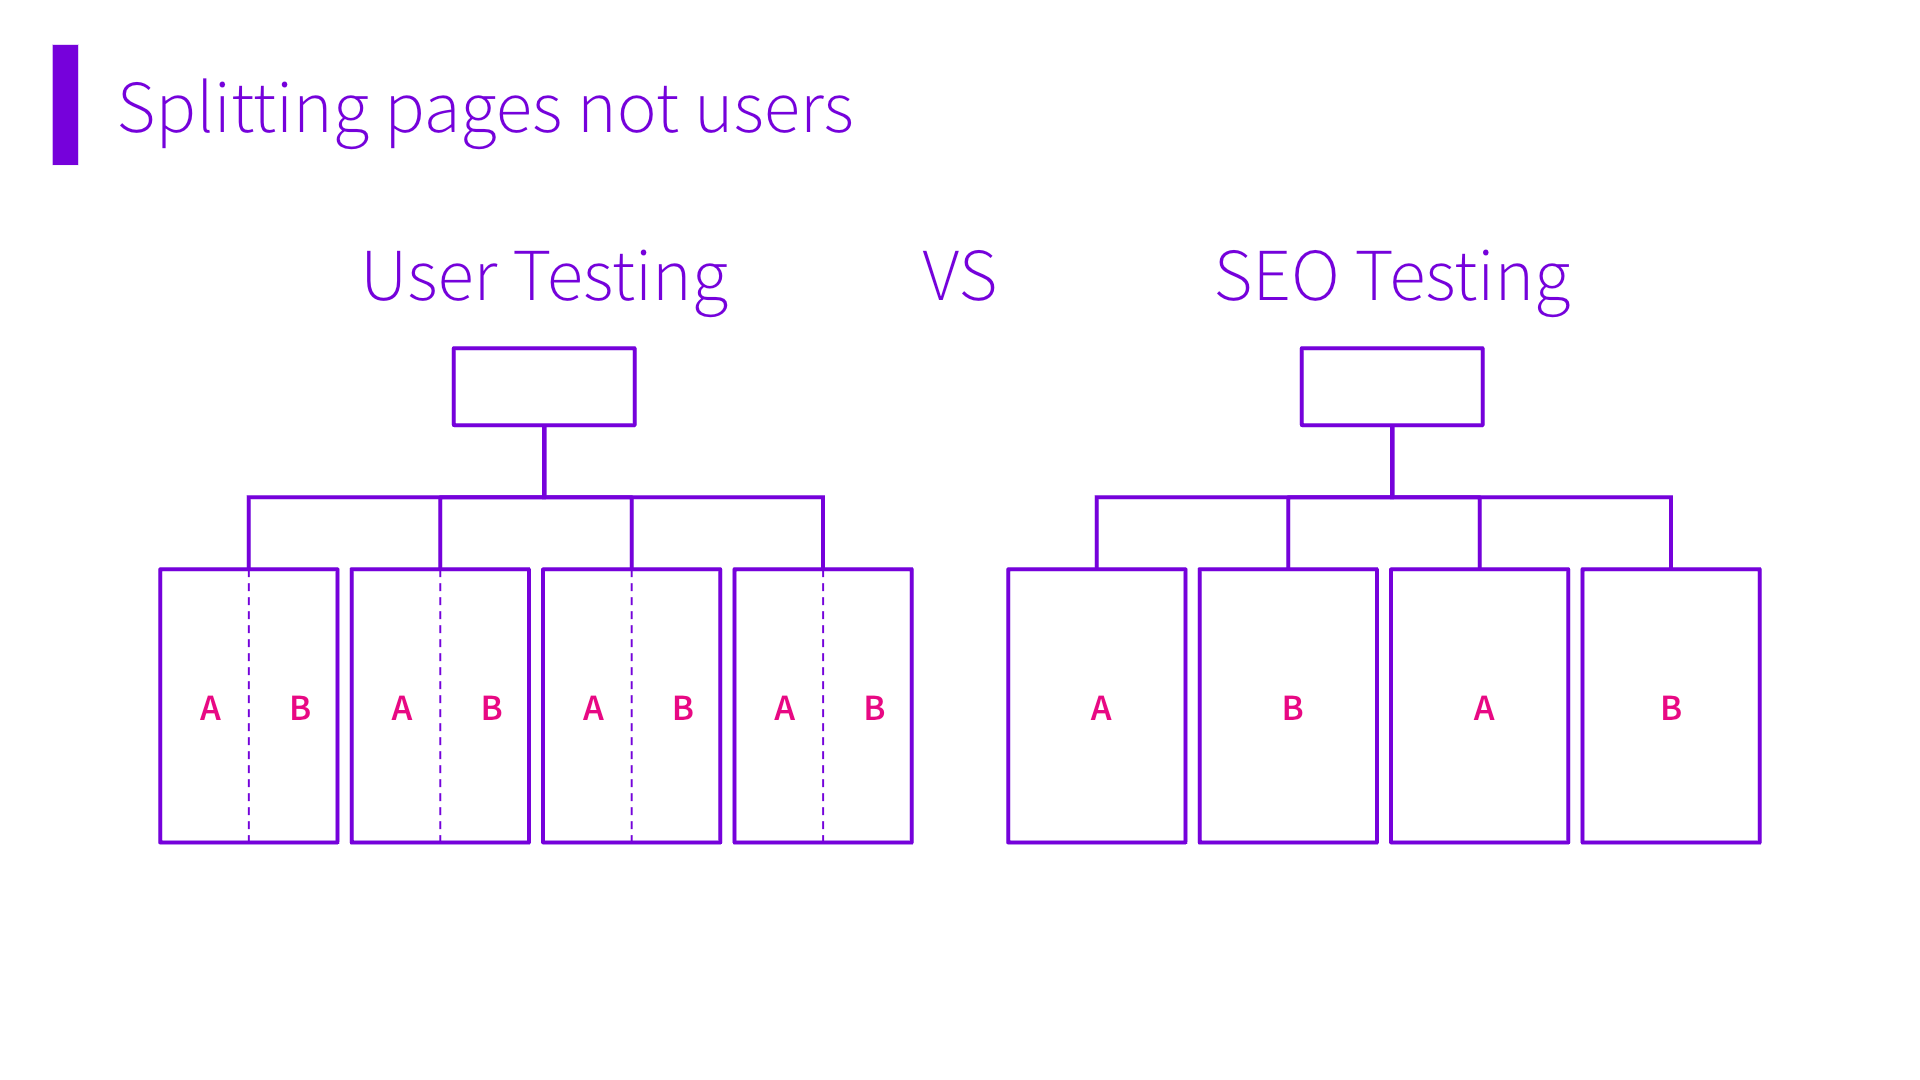 SEO split-testing is splitting pages not users